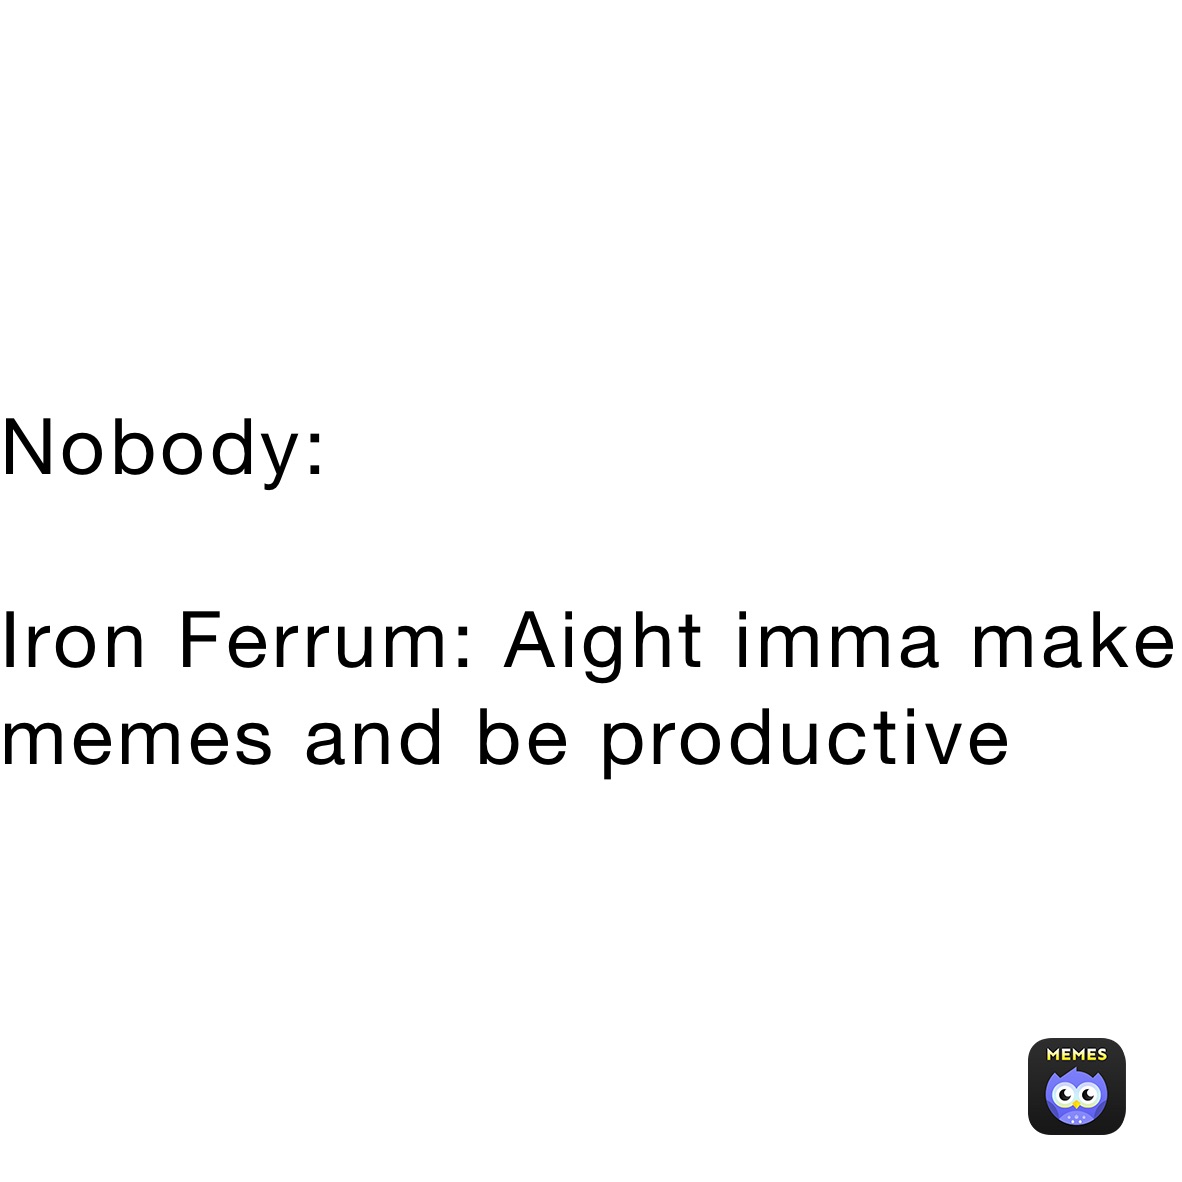 Nobody:

Iron Ferrum: Aight imma make memes and be productive